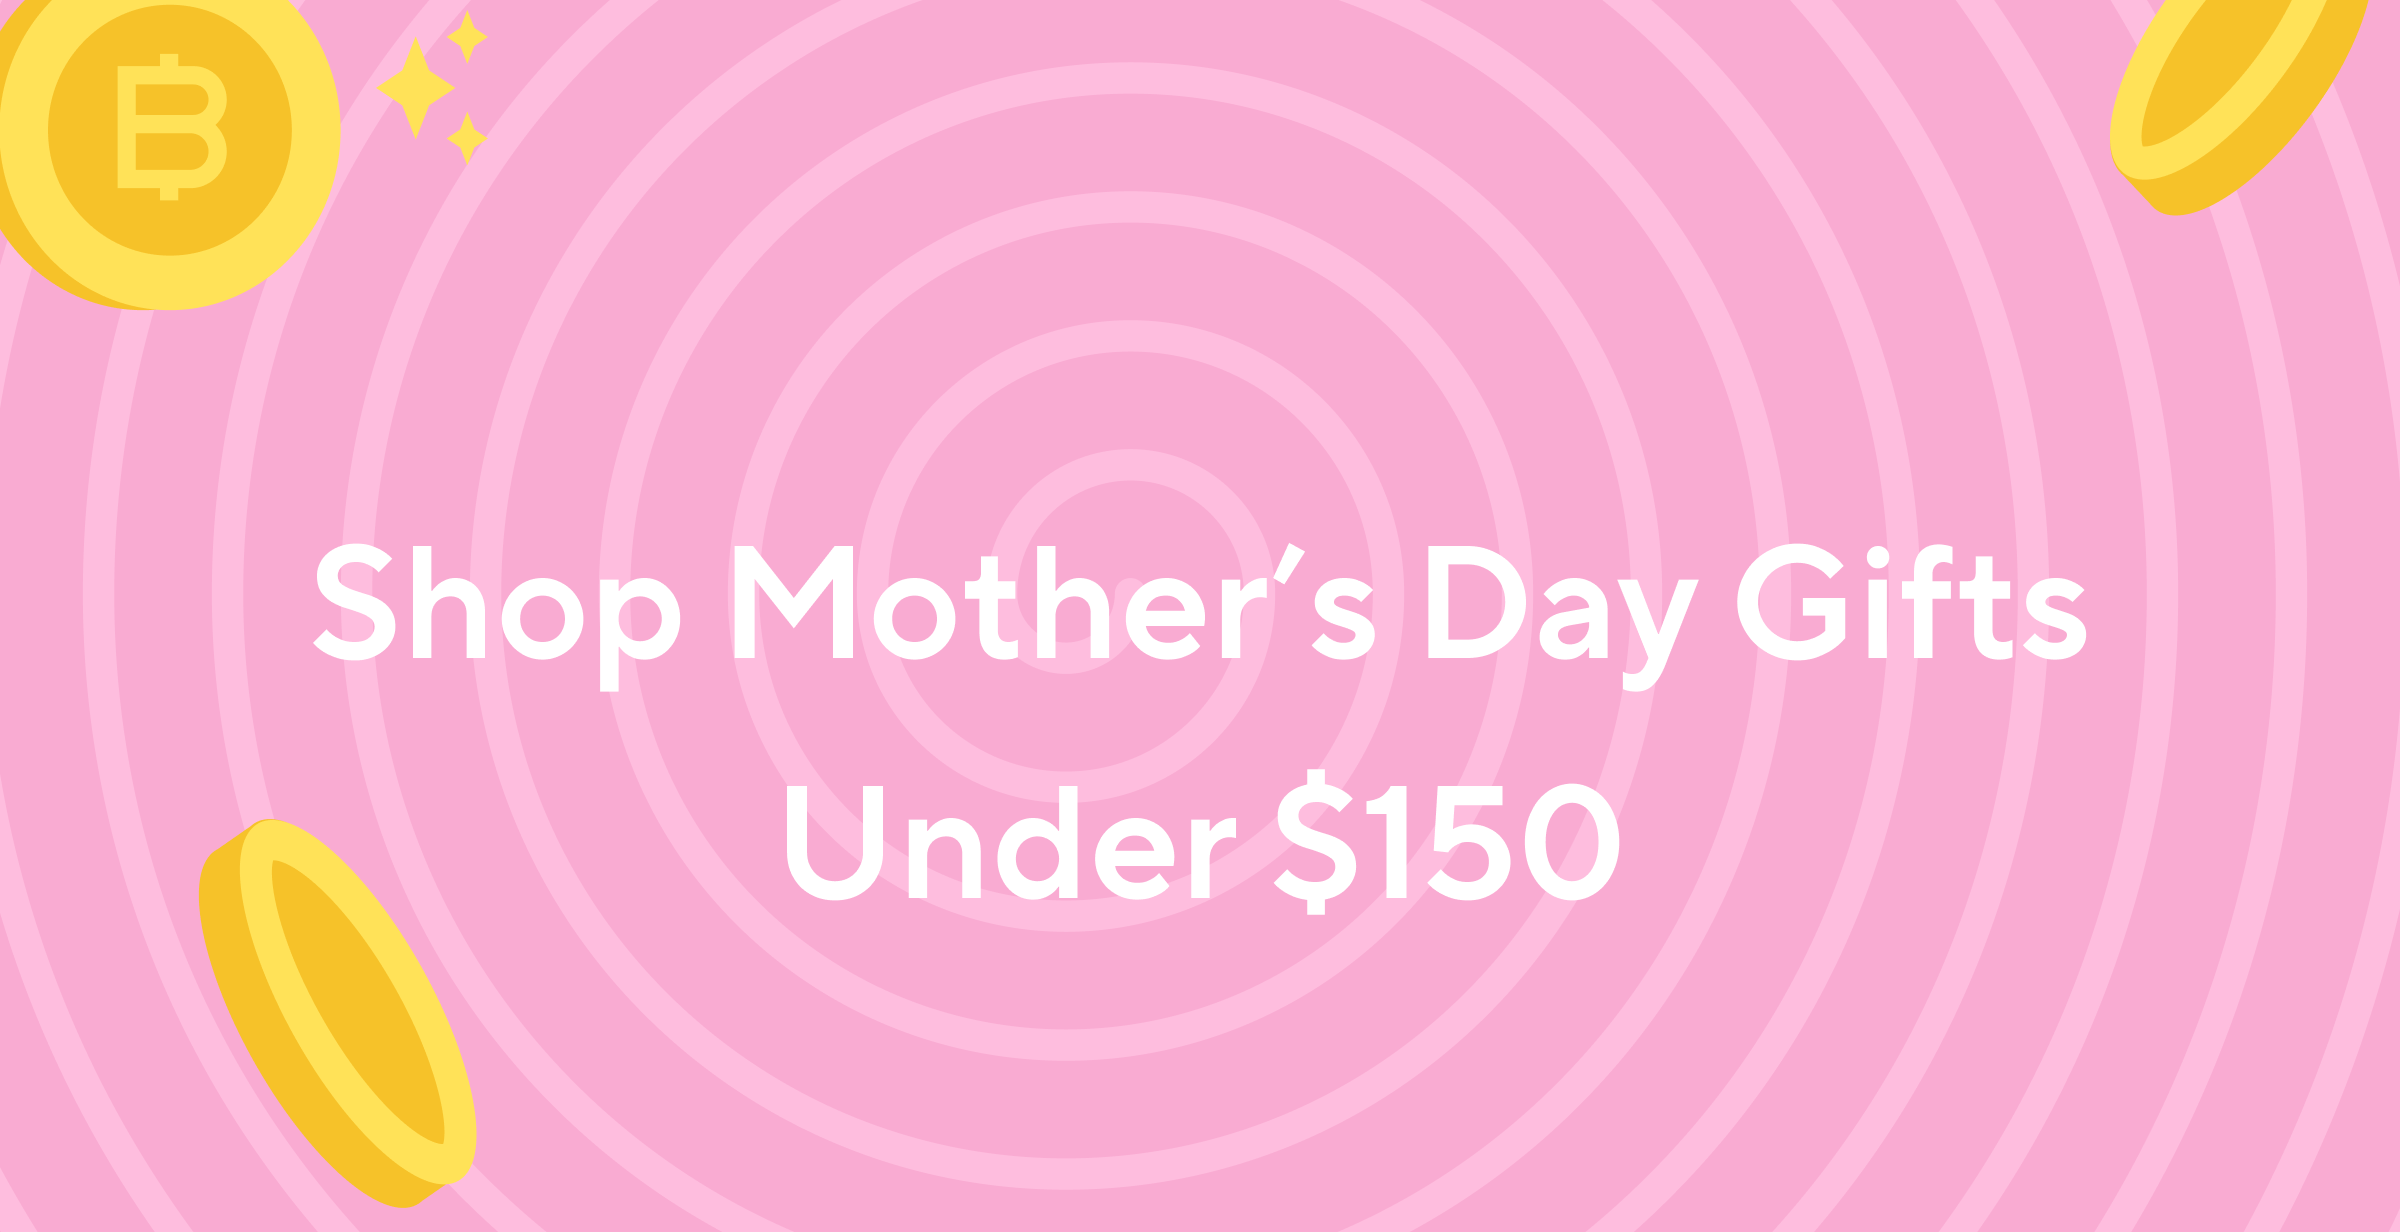 Under $150: Top Gifts for Mother's Day 2022